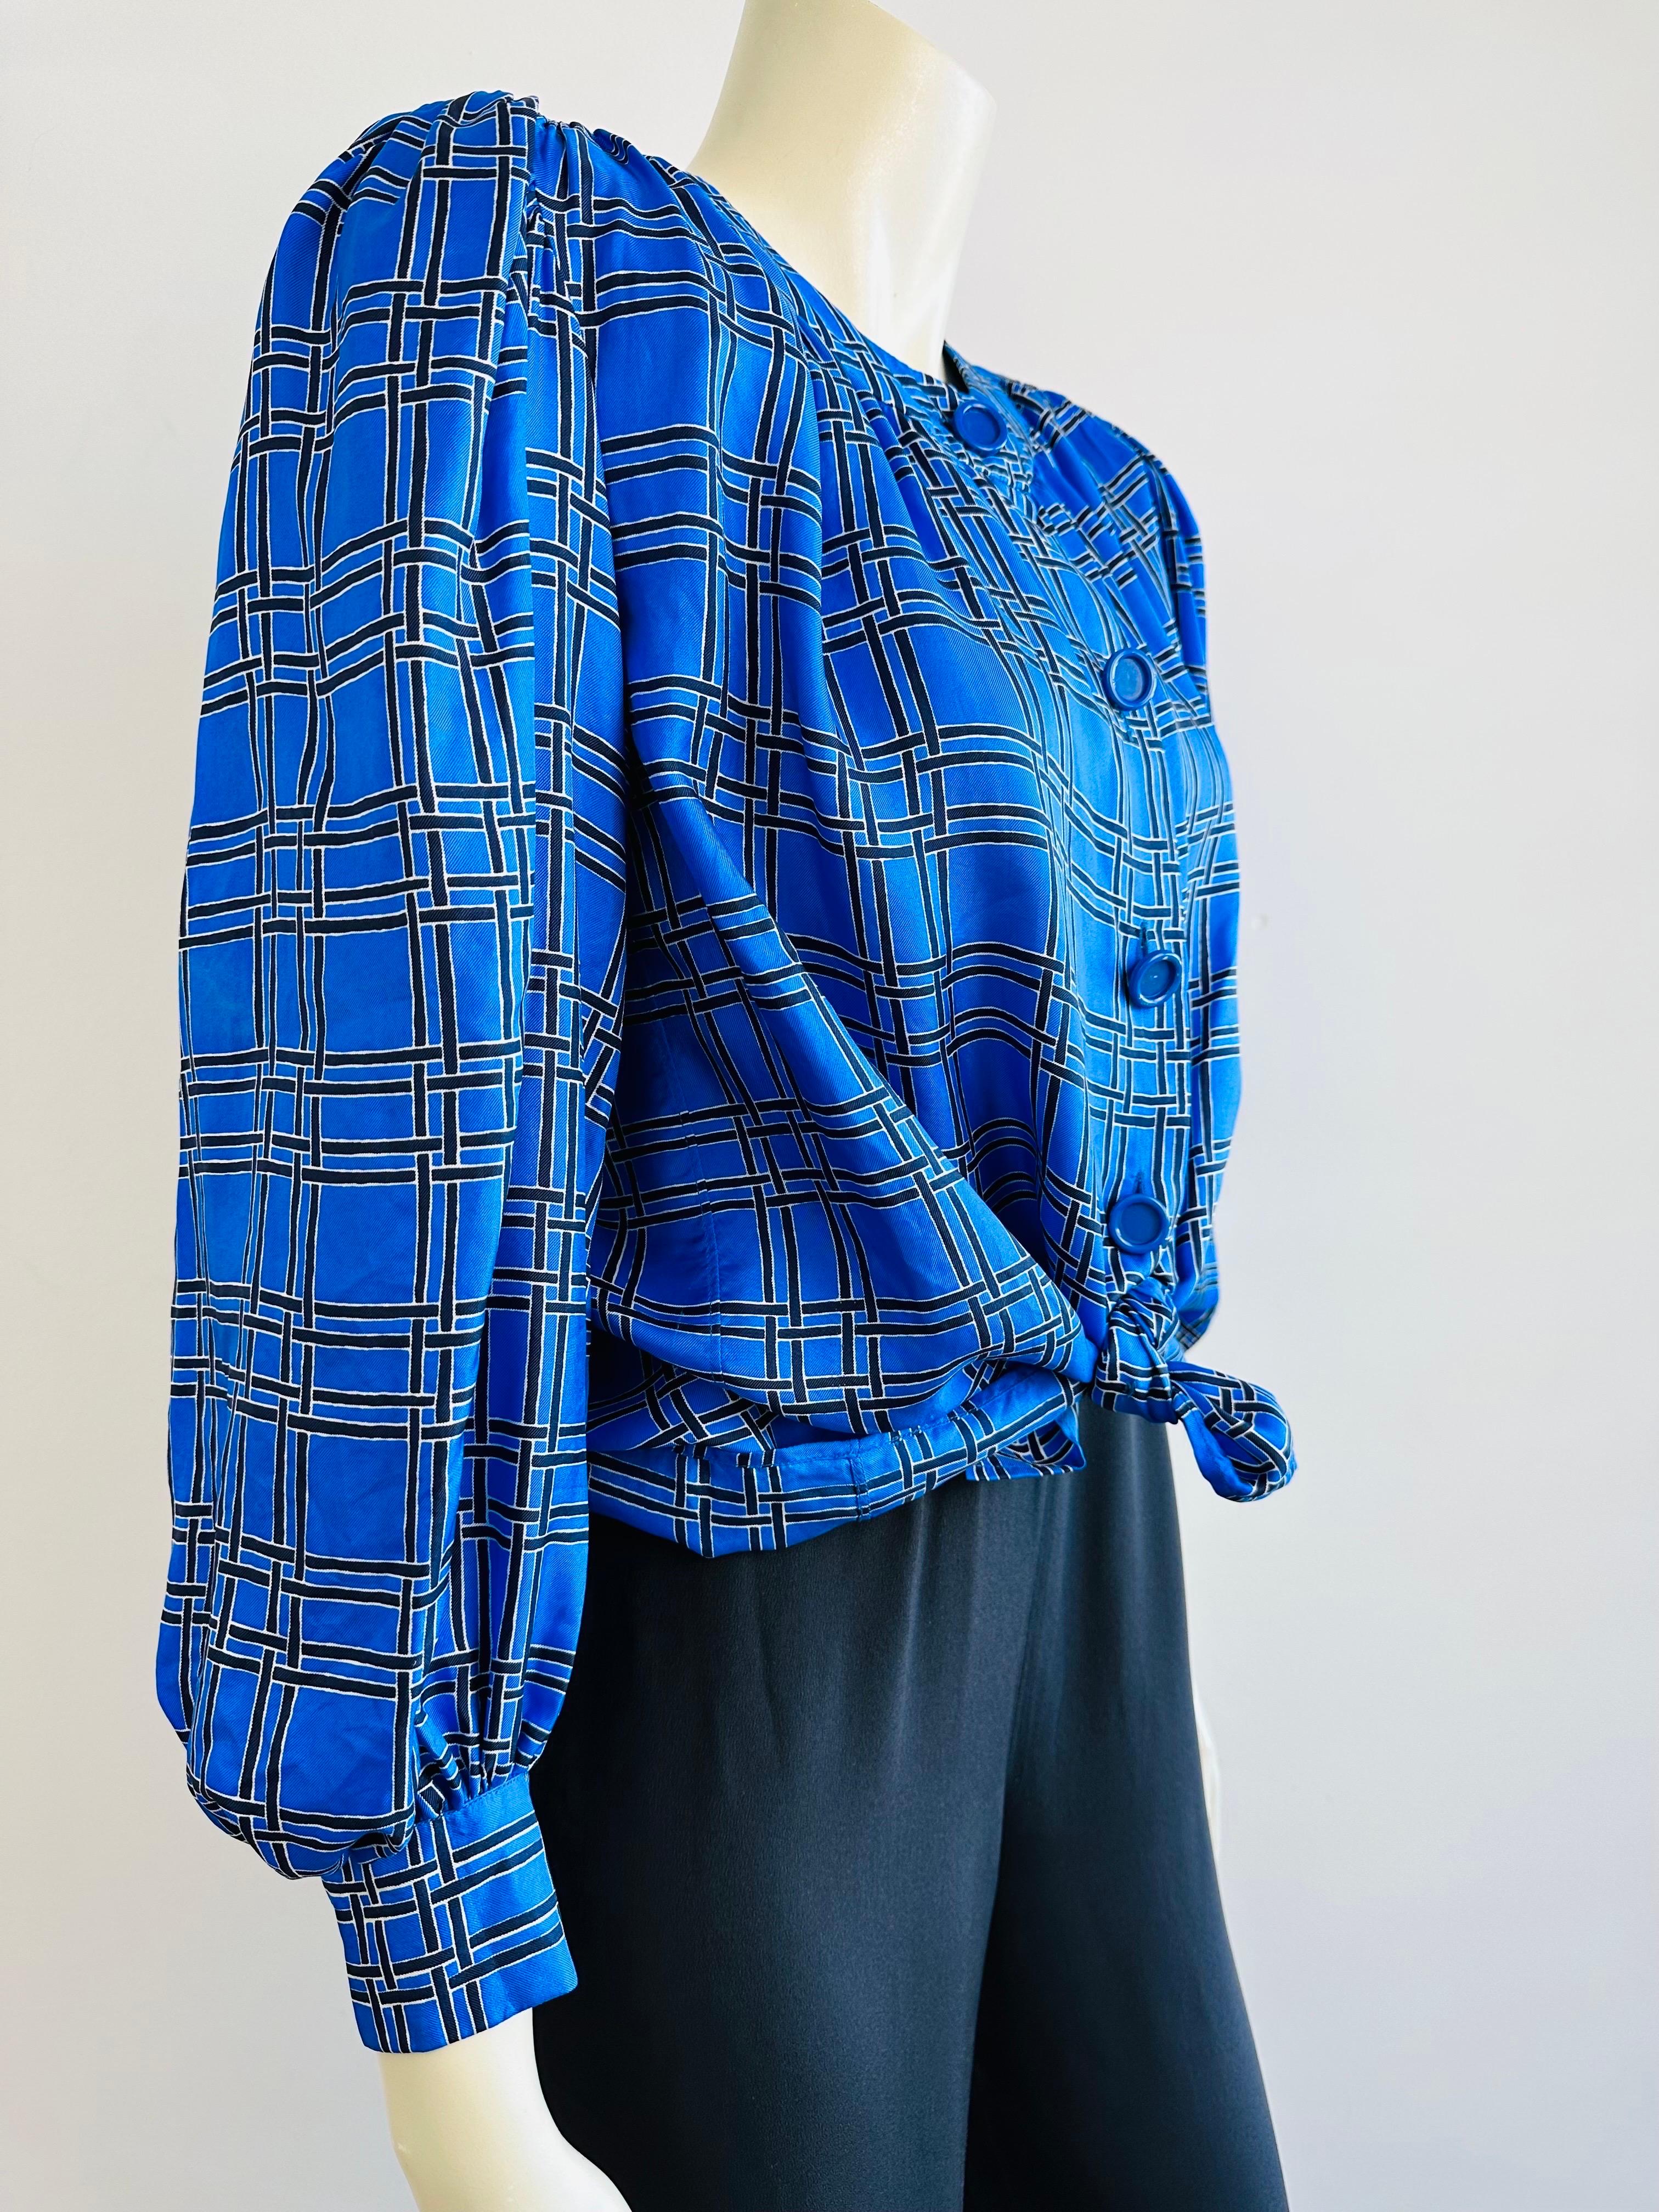 Women's YSL Yves saint Laurent royal blue silk blouse from the 1970s For Sale